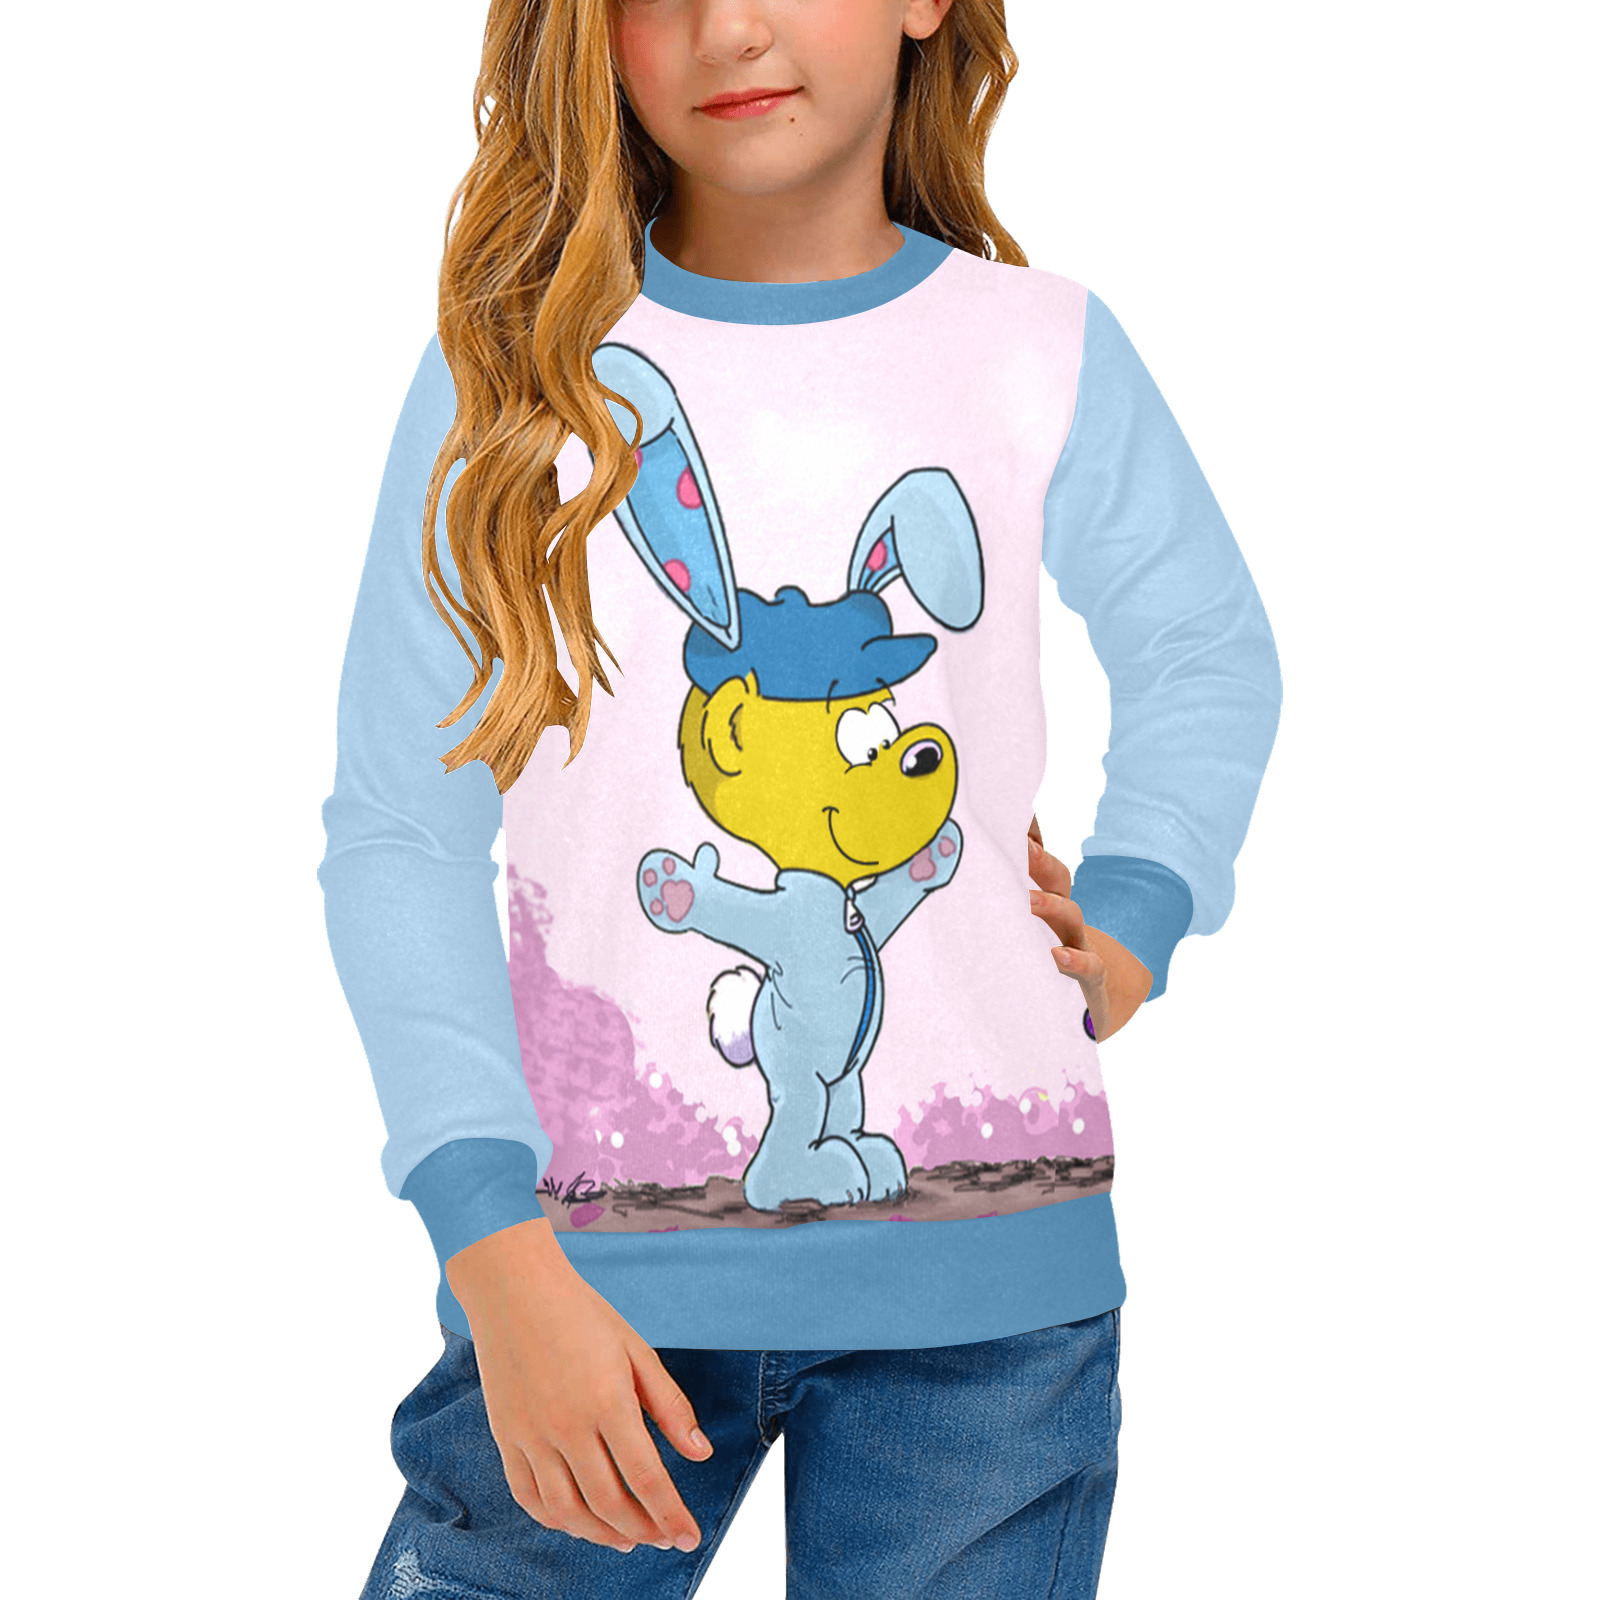 Ferald's Bunny Costume Girls' All Over Print Crew Neck Sweater (Model H49)